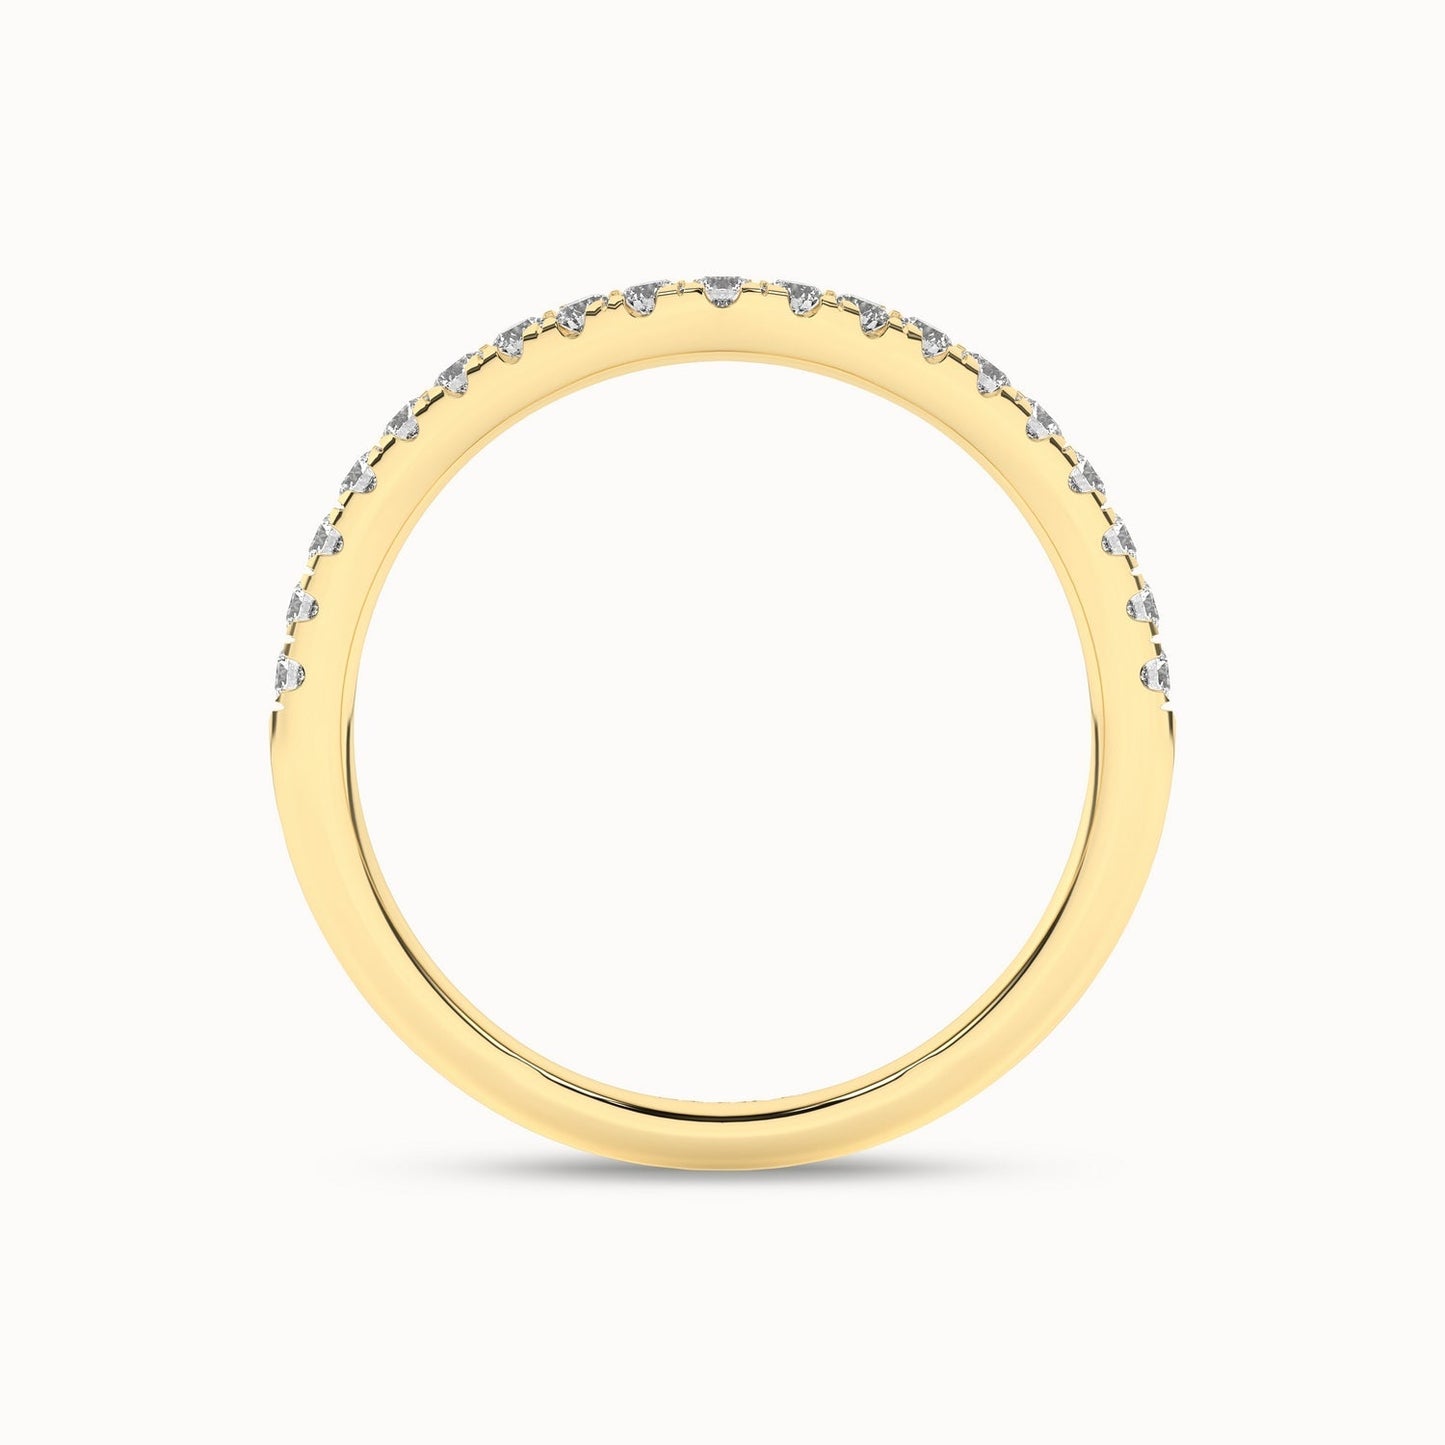 Rippling Round Ring_Product Angle_1/4Ct. - 3